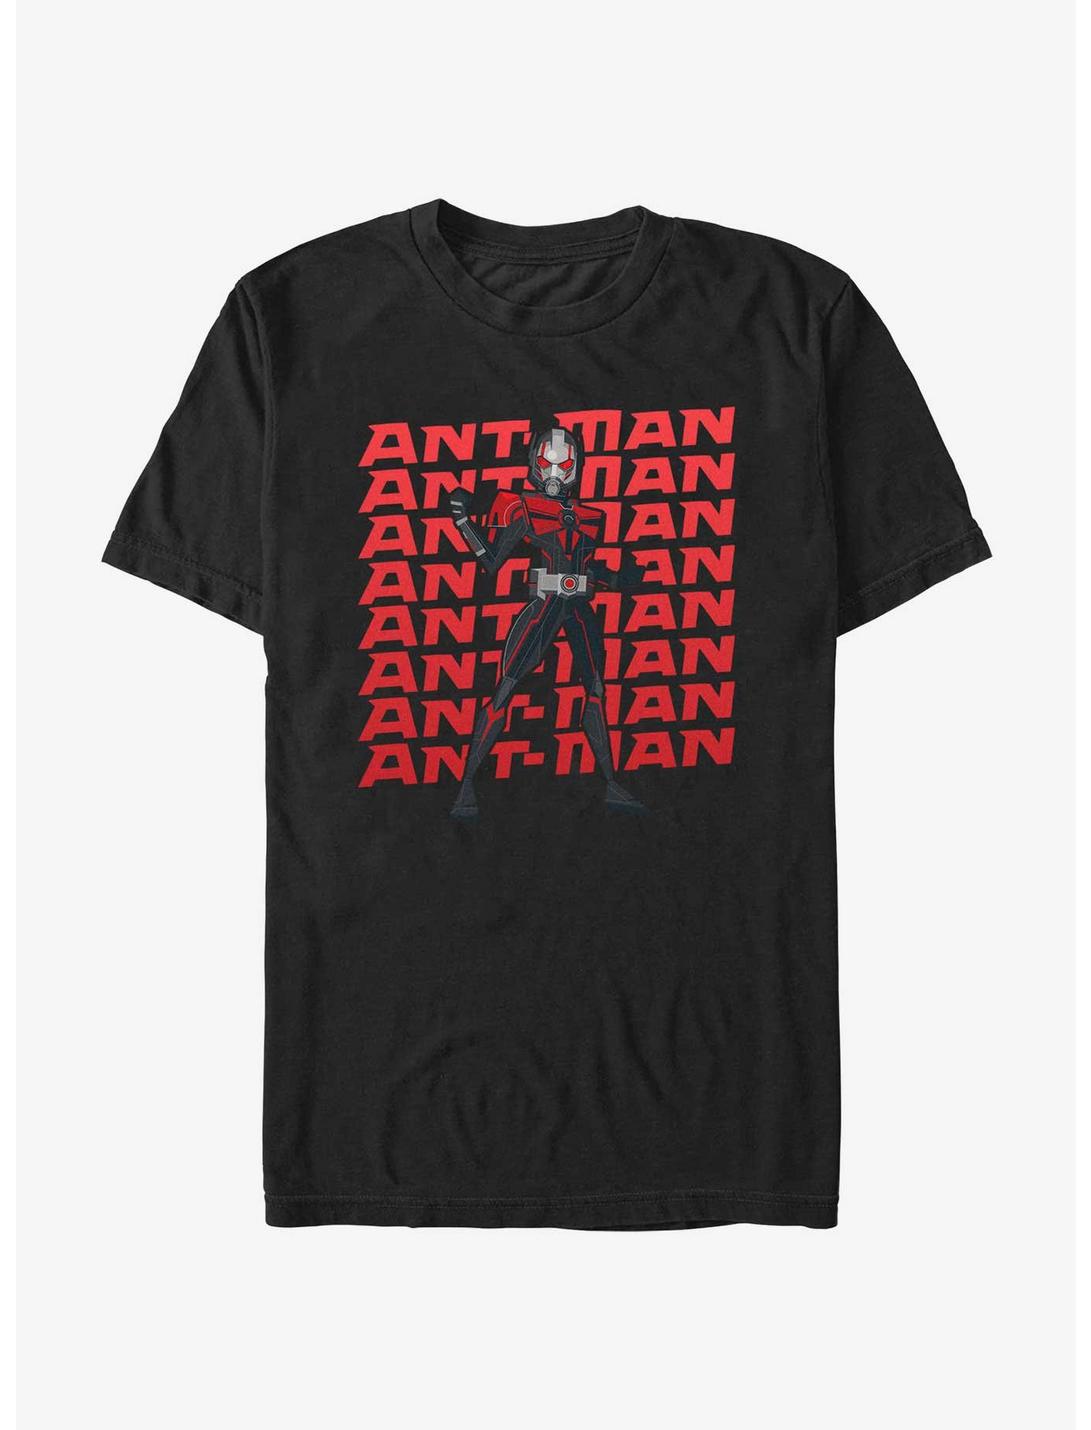 Marvel Ant-Man and the Wasp: Quantumania Action Pose T-Shirt, BLACK, hi-res